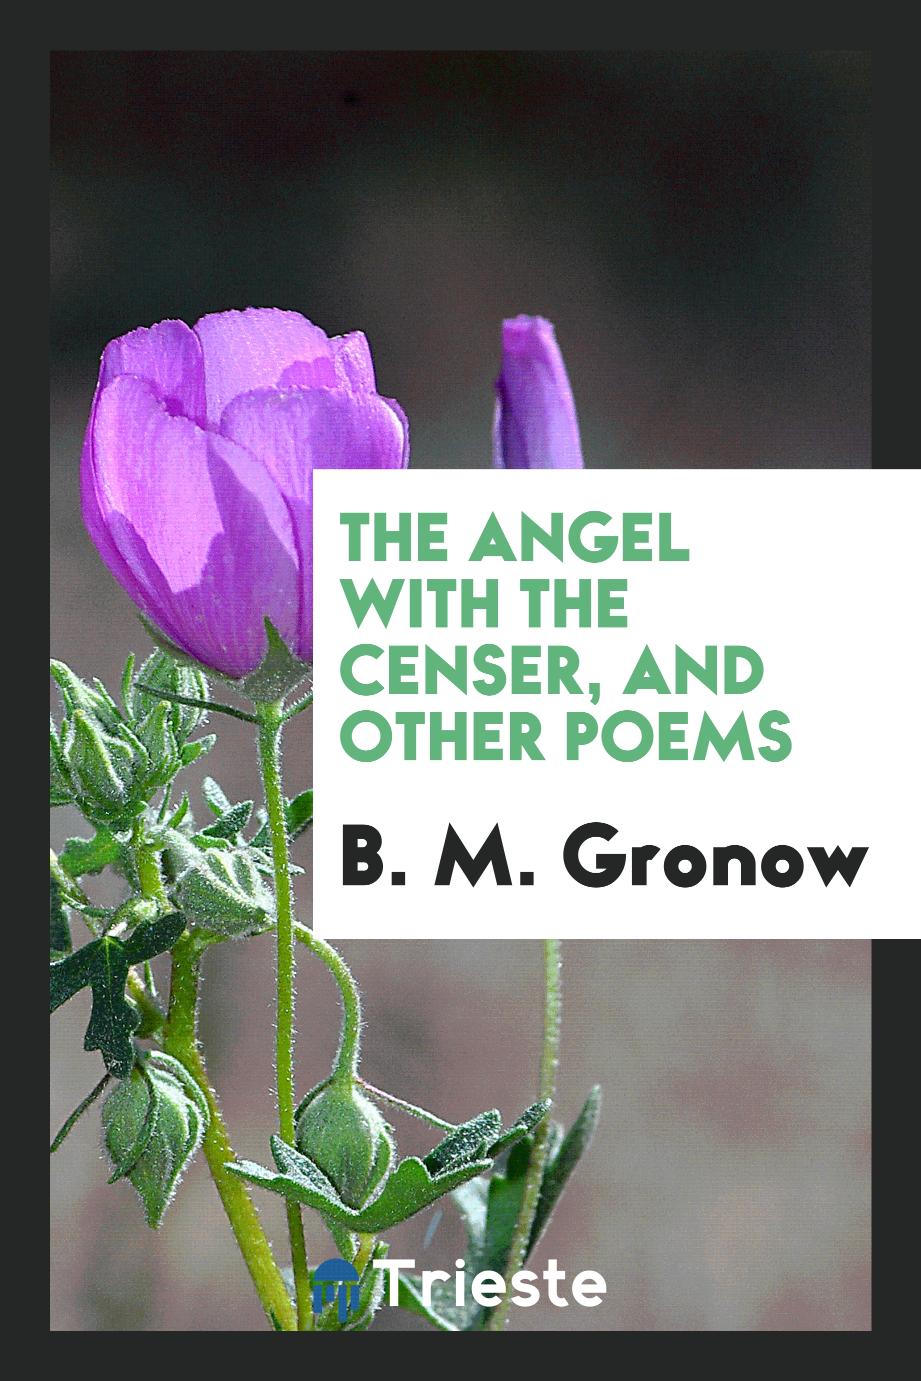 The angel with the censer, and other poems